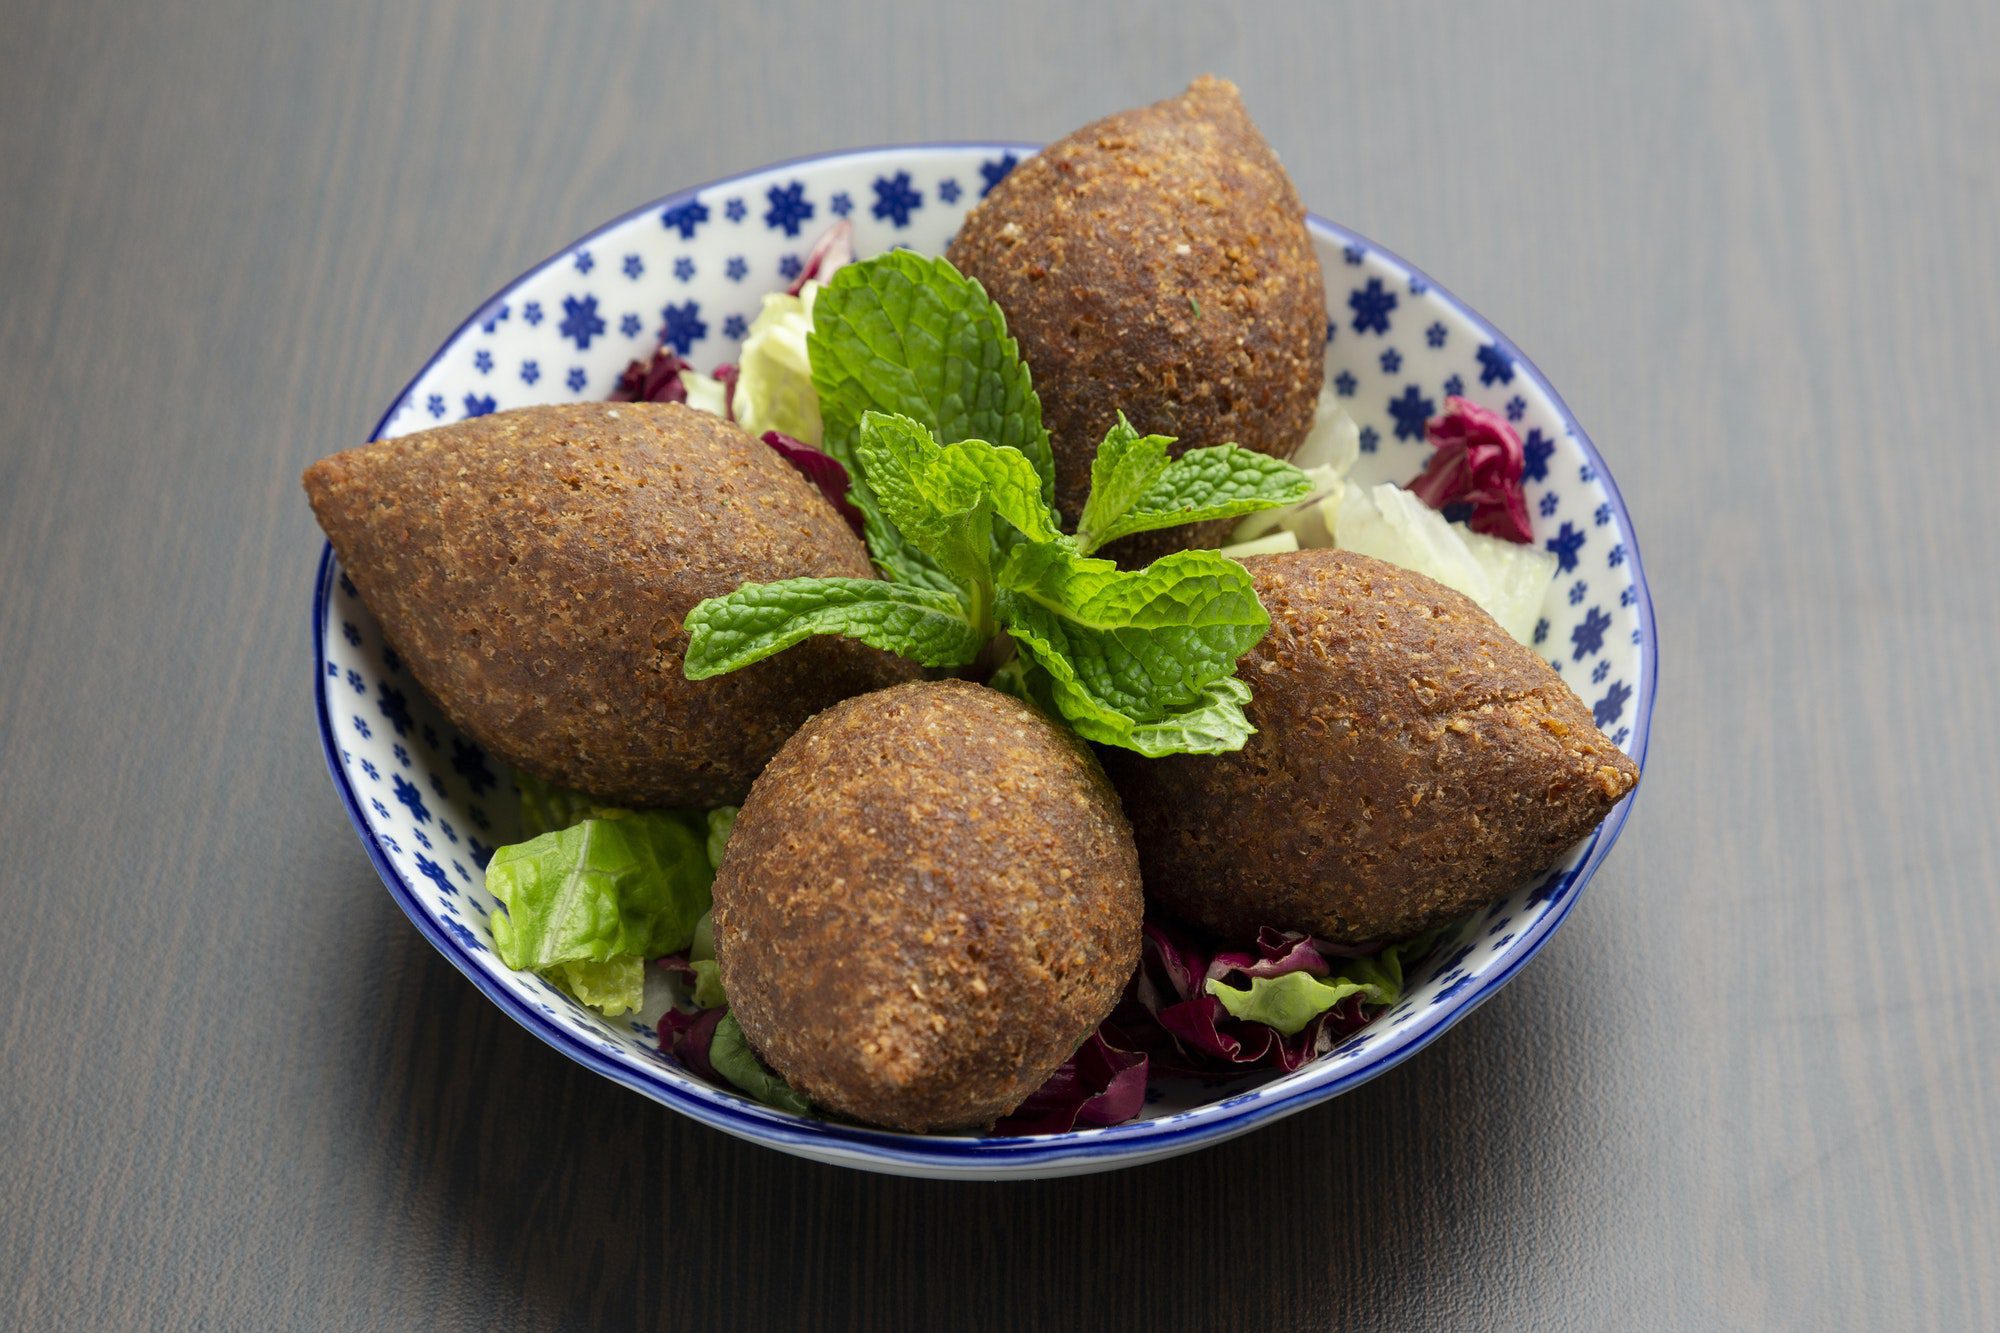 Kibbeh Middle Eastern dish of ground lamb with bulgar wheat and seasonings, eaten cooked or raw.